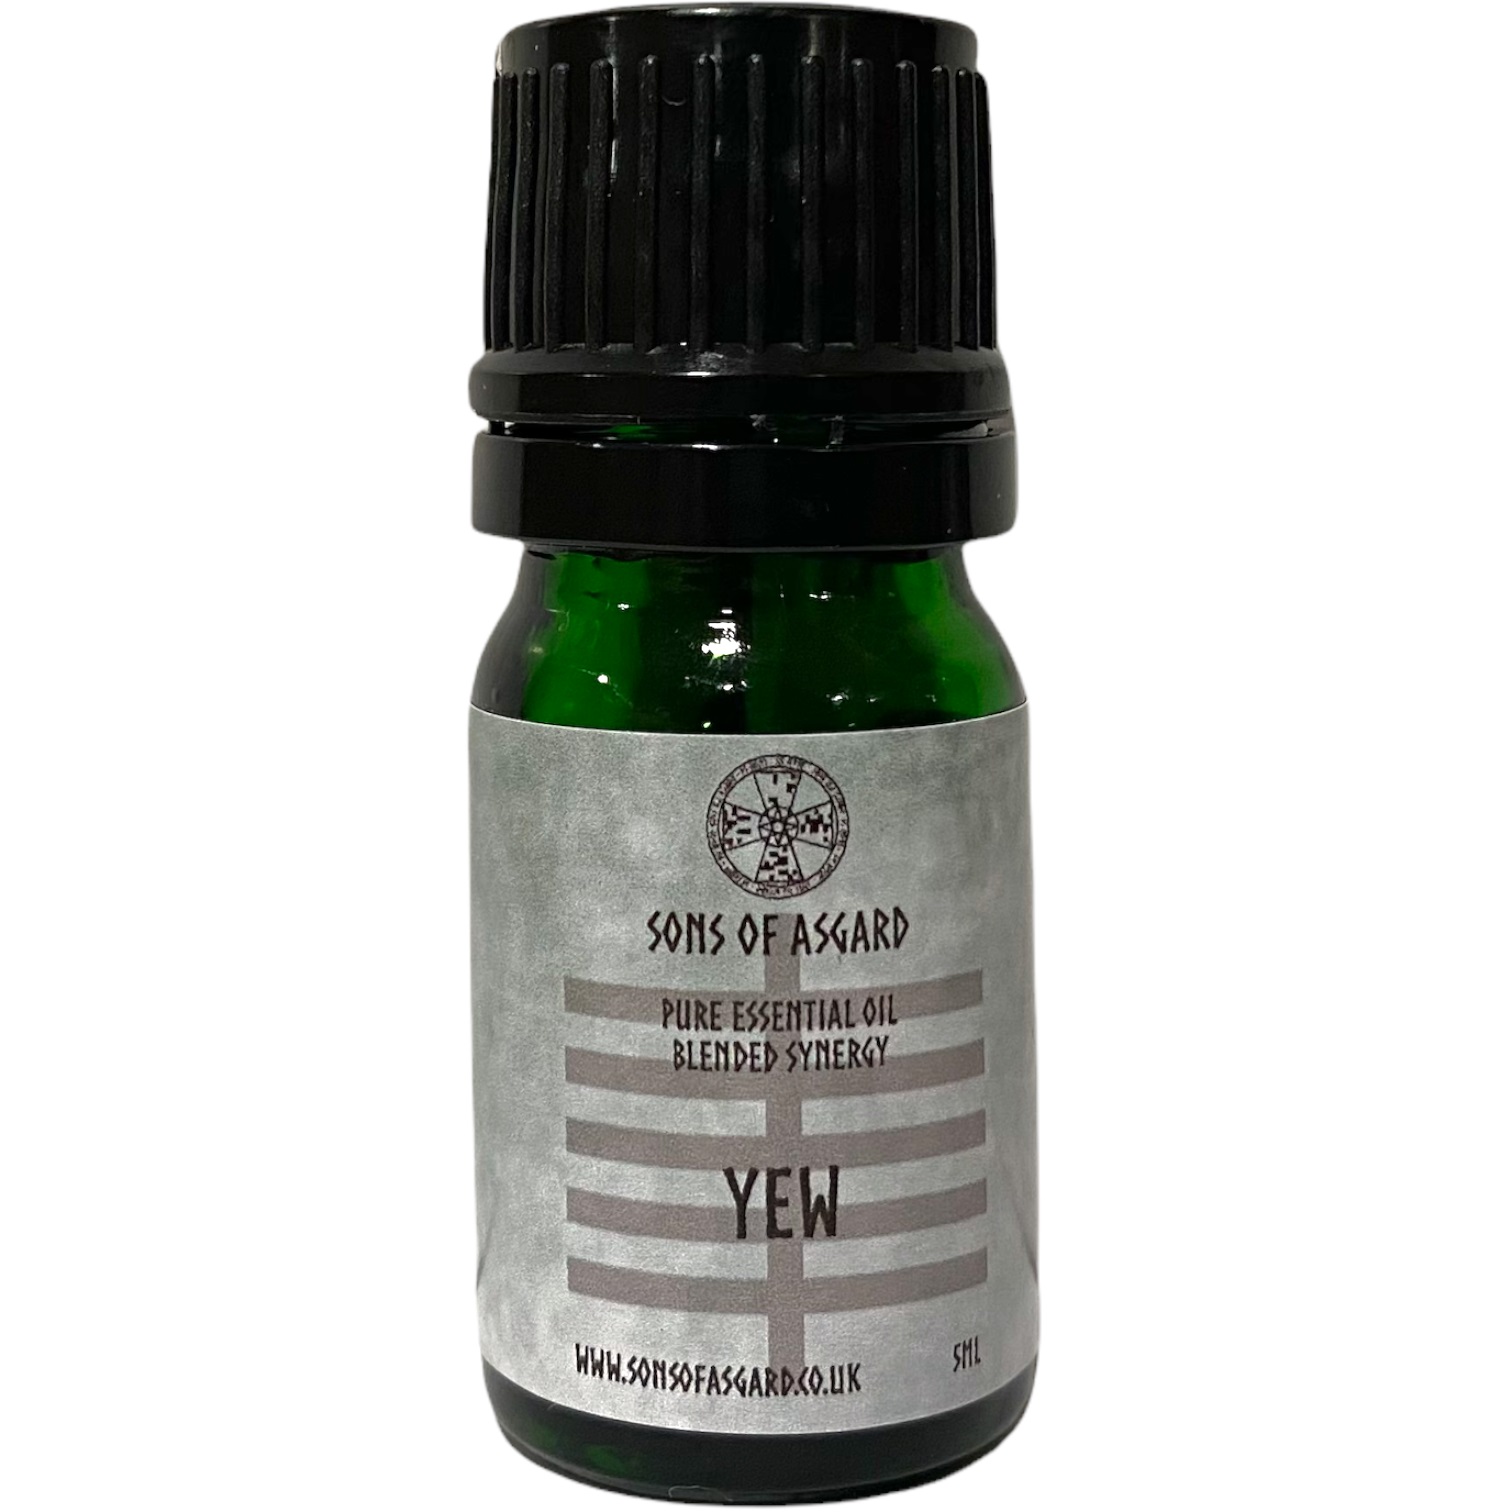 Yew - Blended Synergy